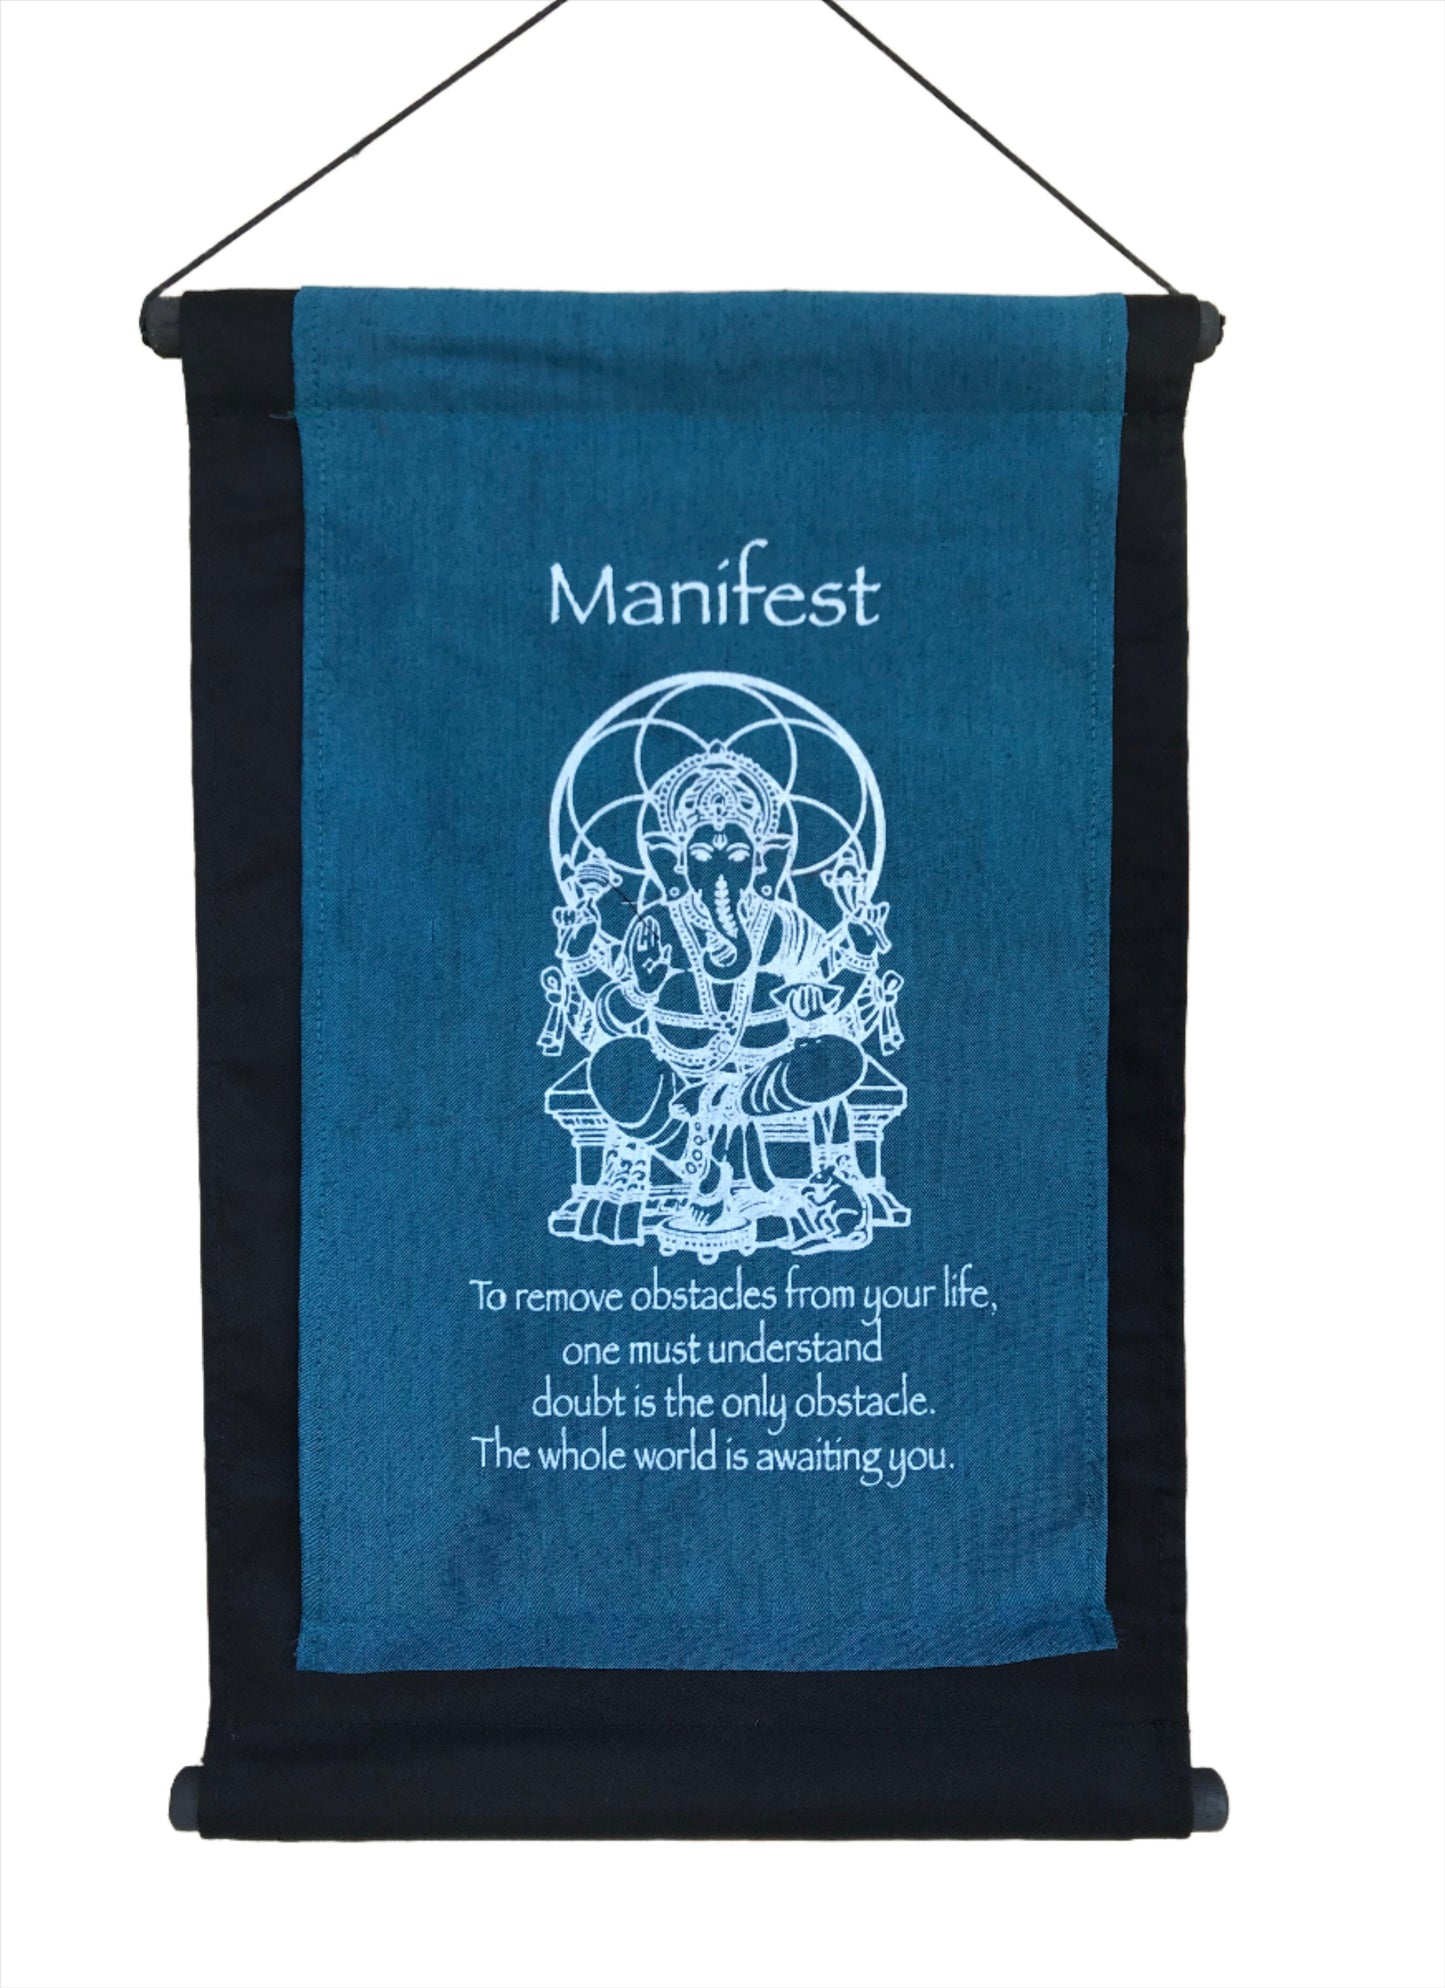 Hand Woven Ikat Ganesh Blessing Manifestation Banners - Available in 2 Sizes